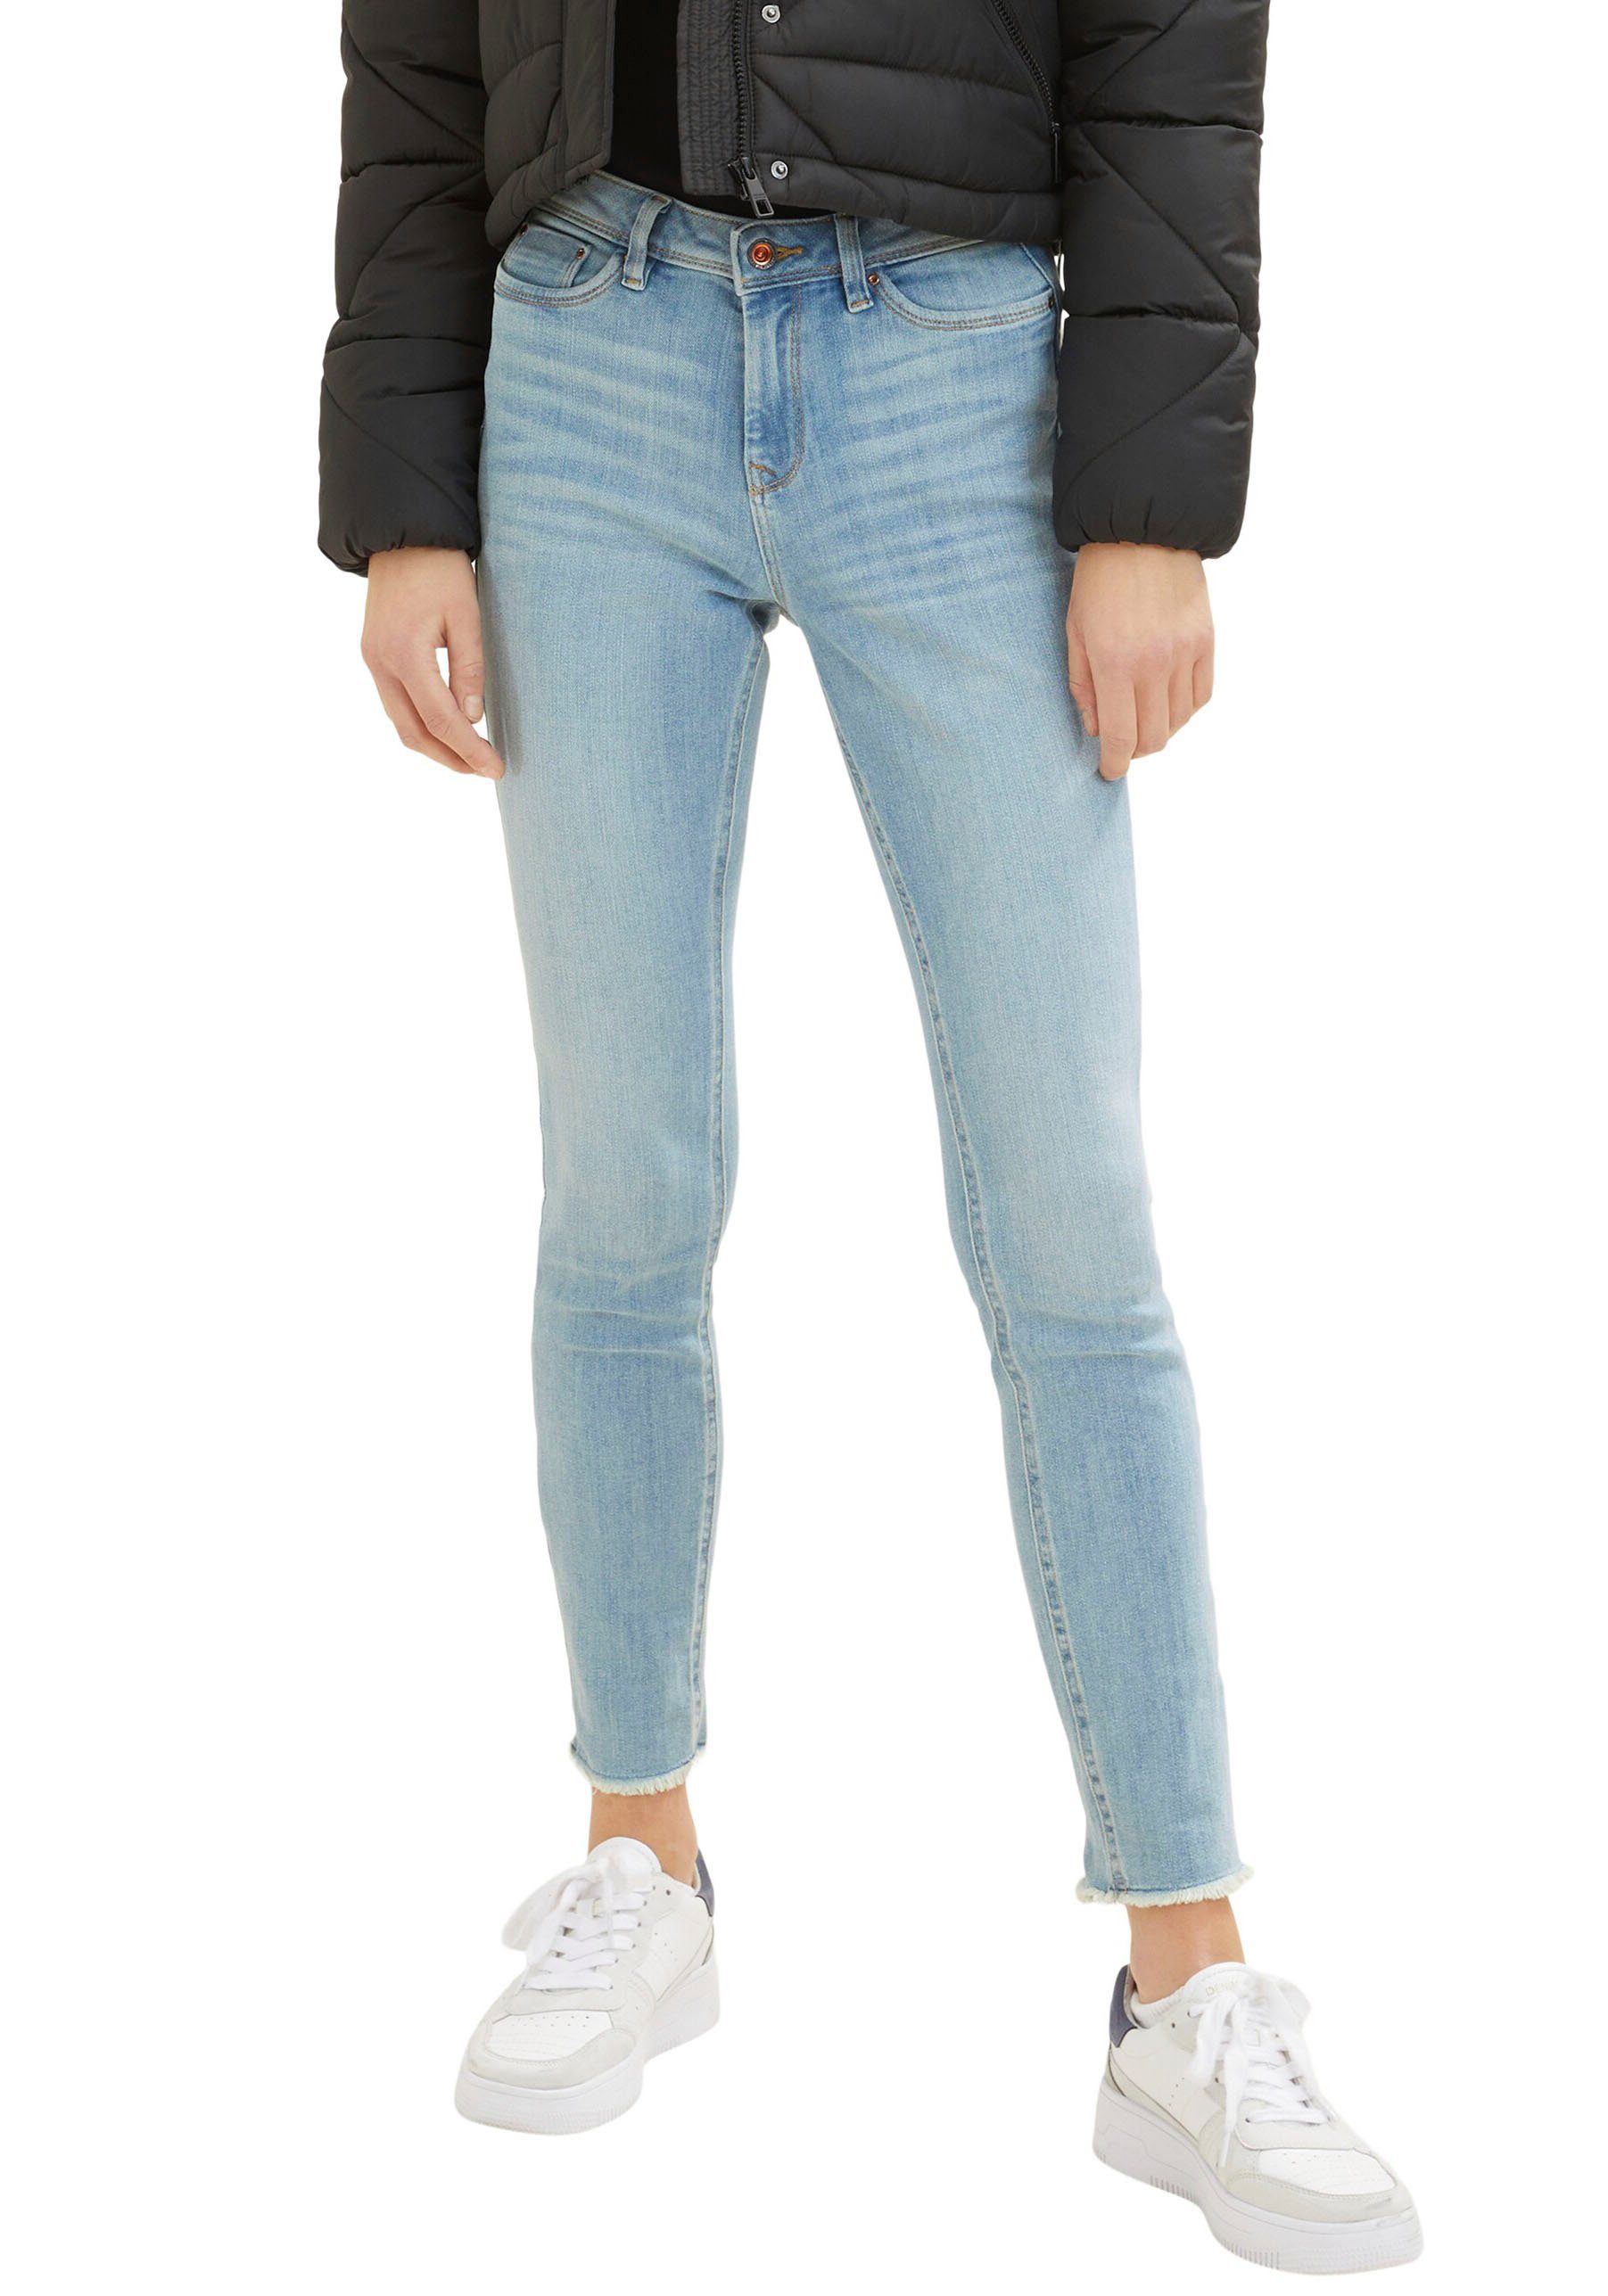 TOM TAILOR Denim Ankle-Jeans Extra Skinny Ankle Jeans mit ausgefranstem Beinabschluss used light